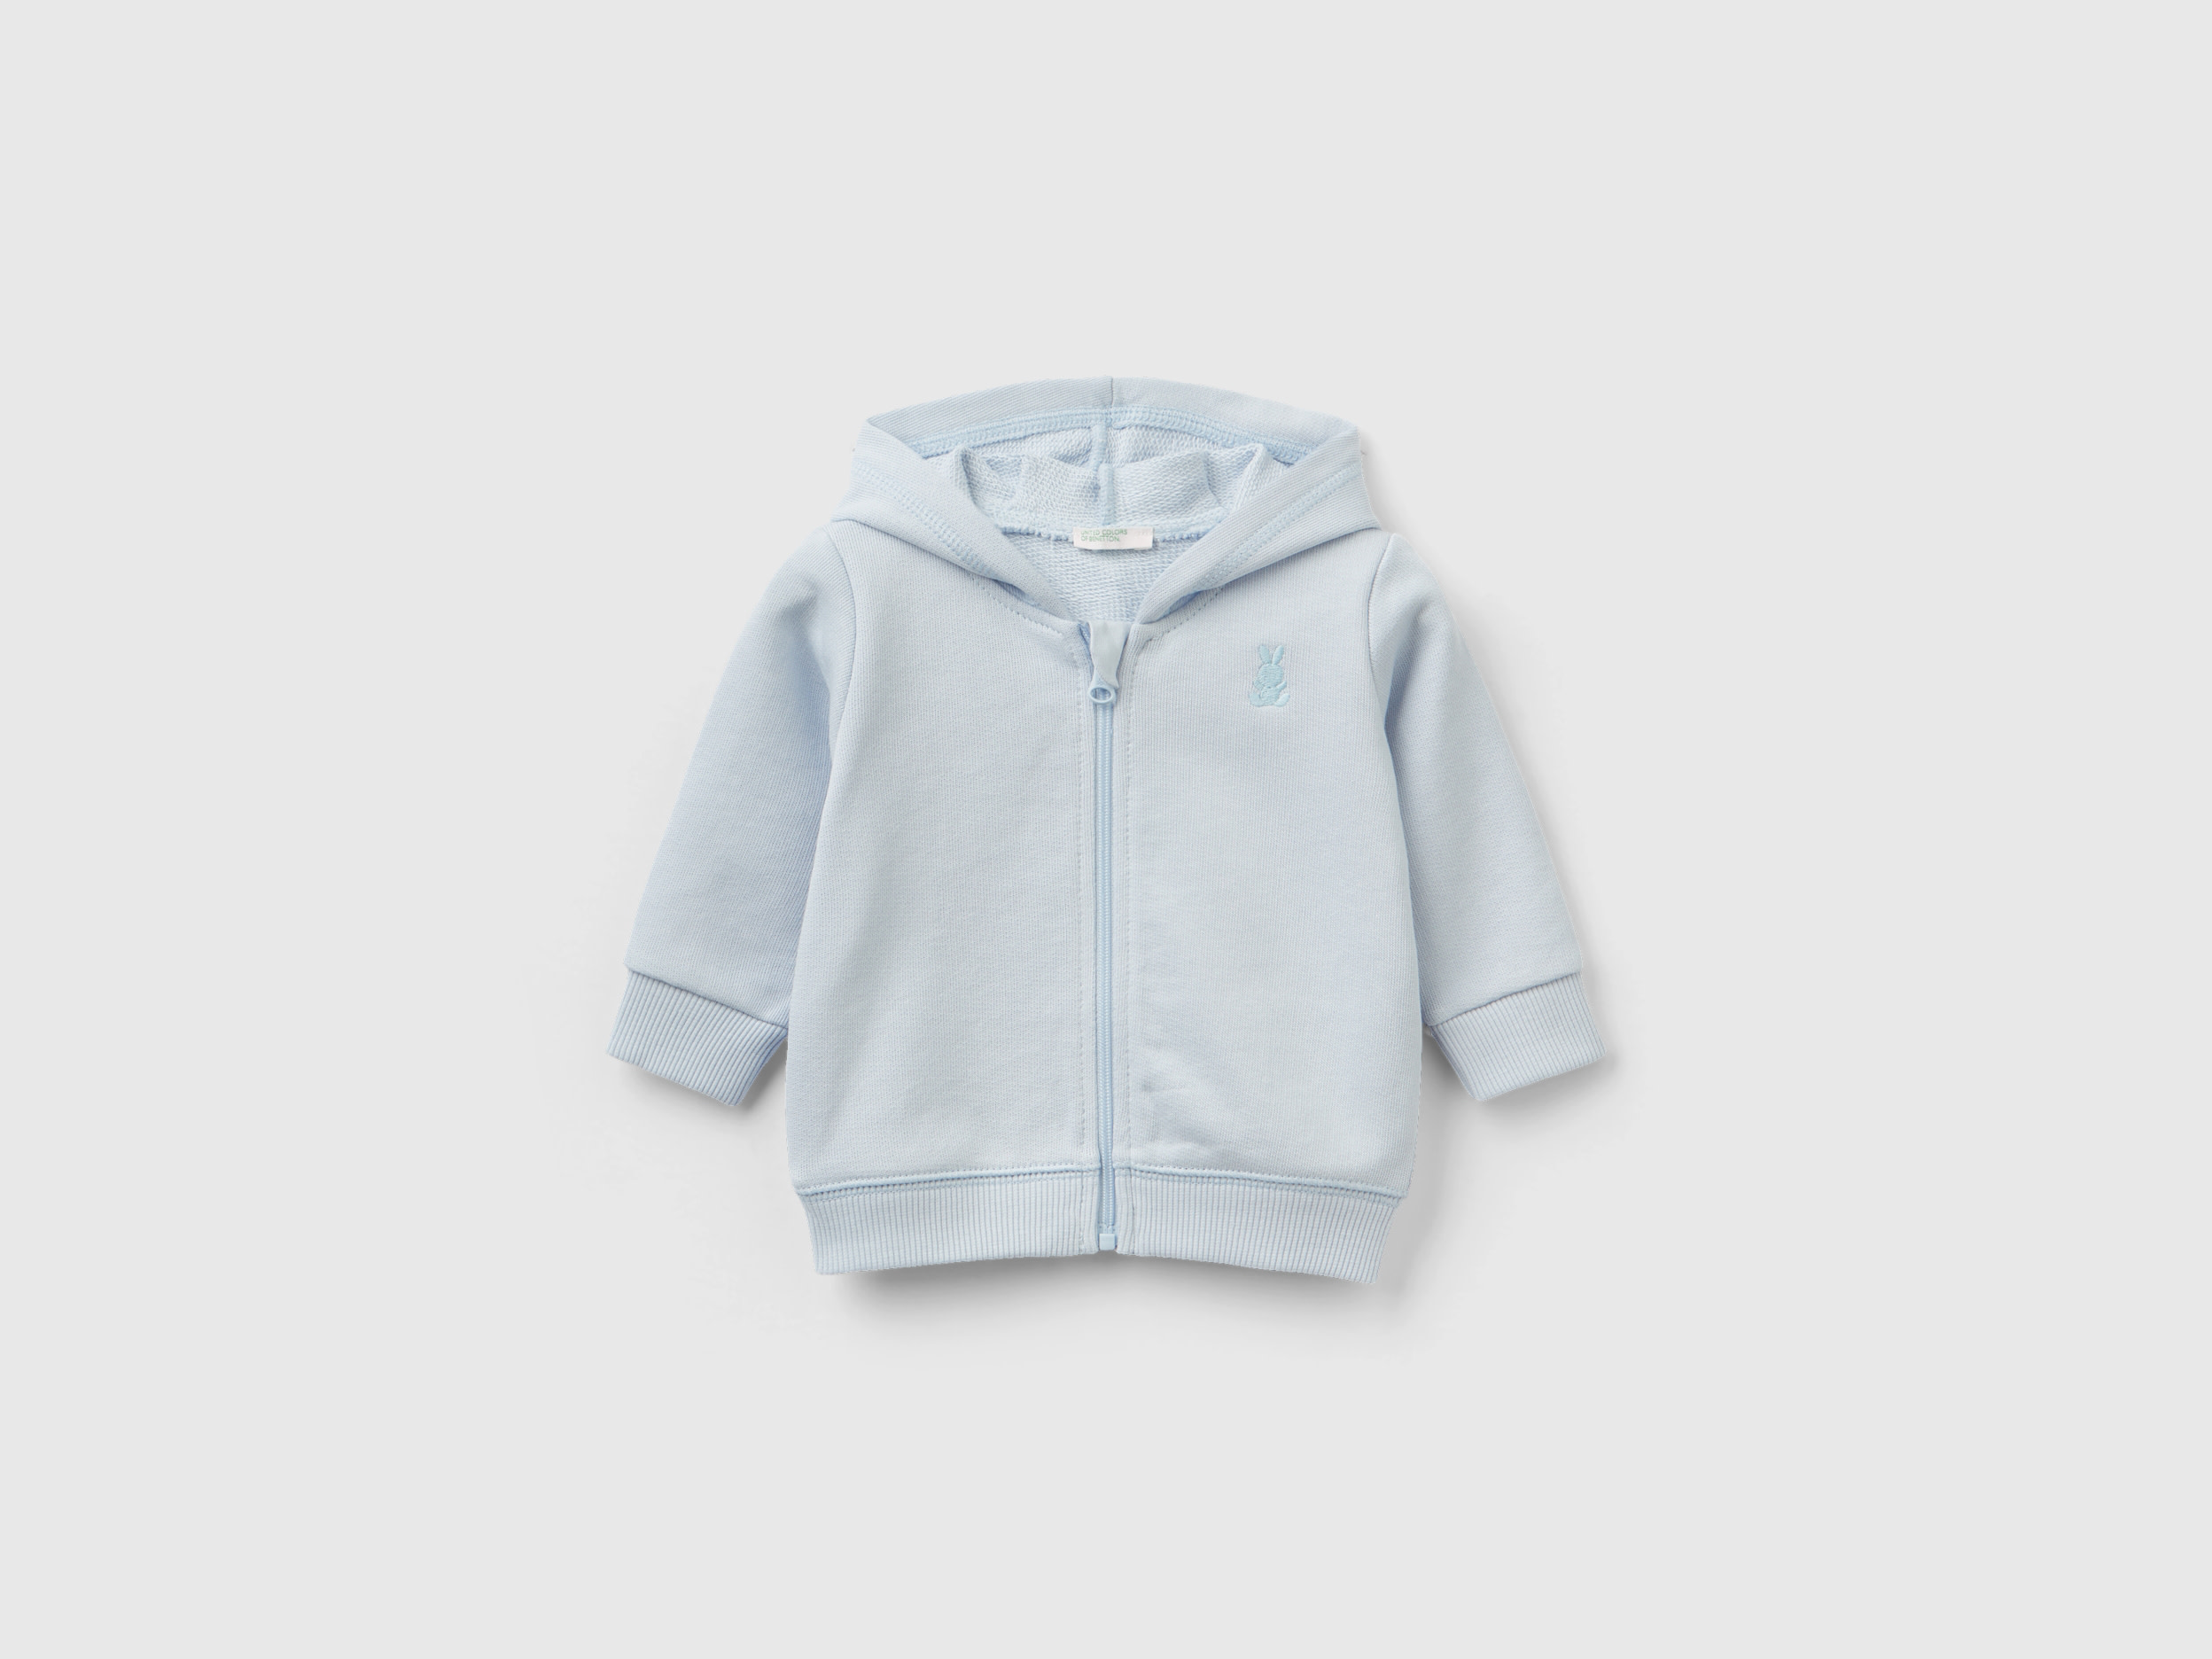 Image of Benetton, Hoodie In Organic Cotton, size 68, Sky Blue, Kids